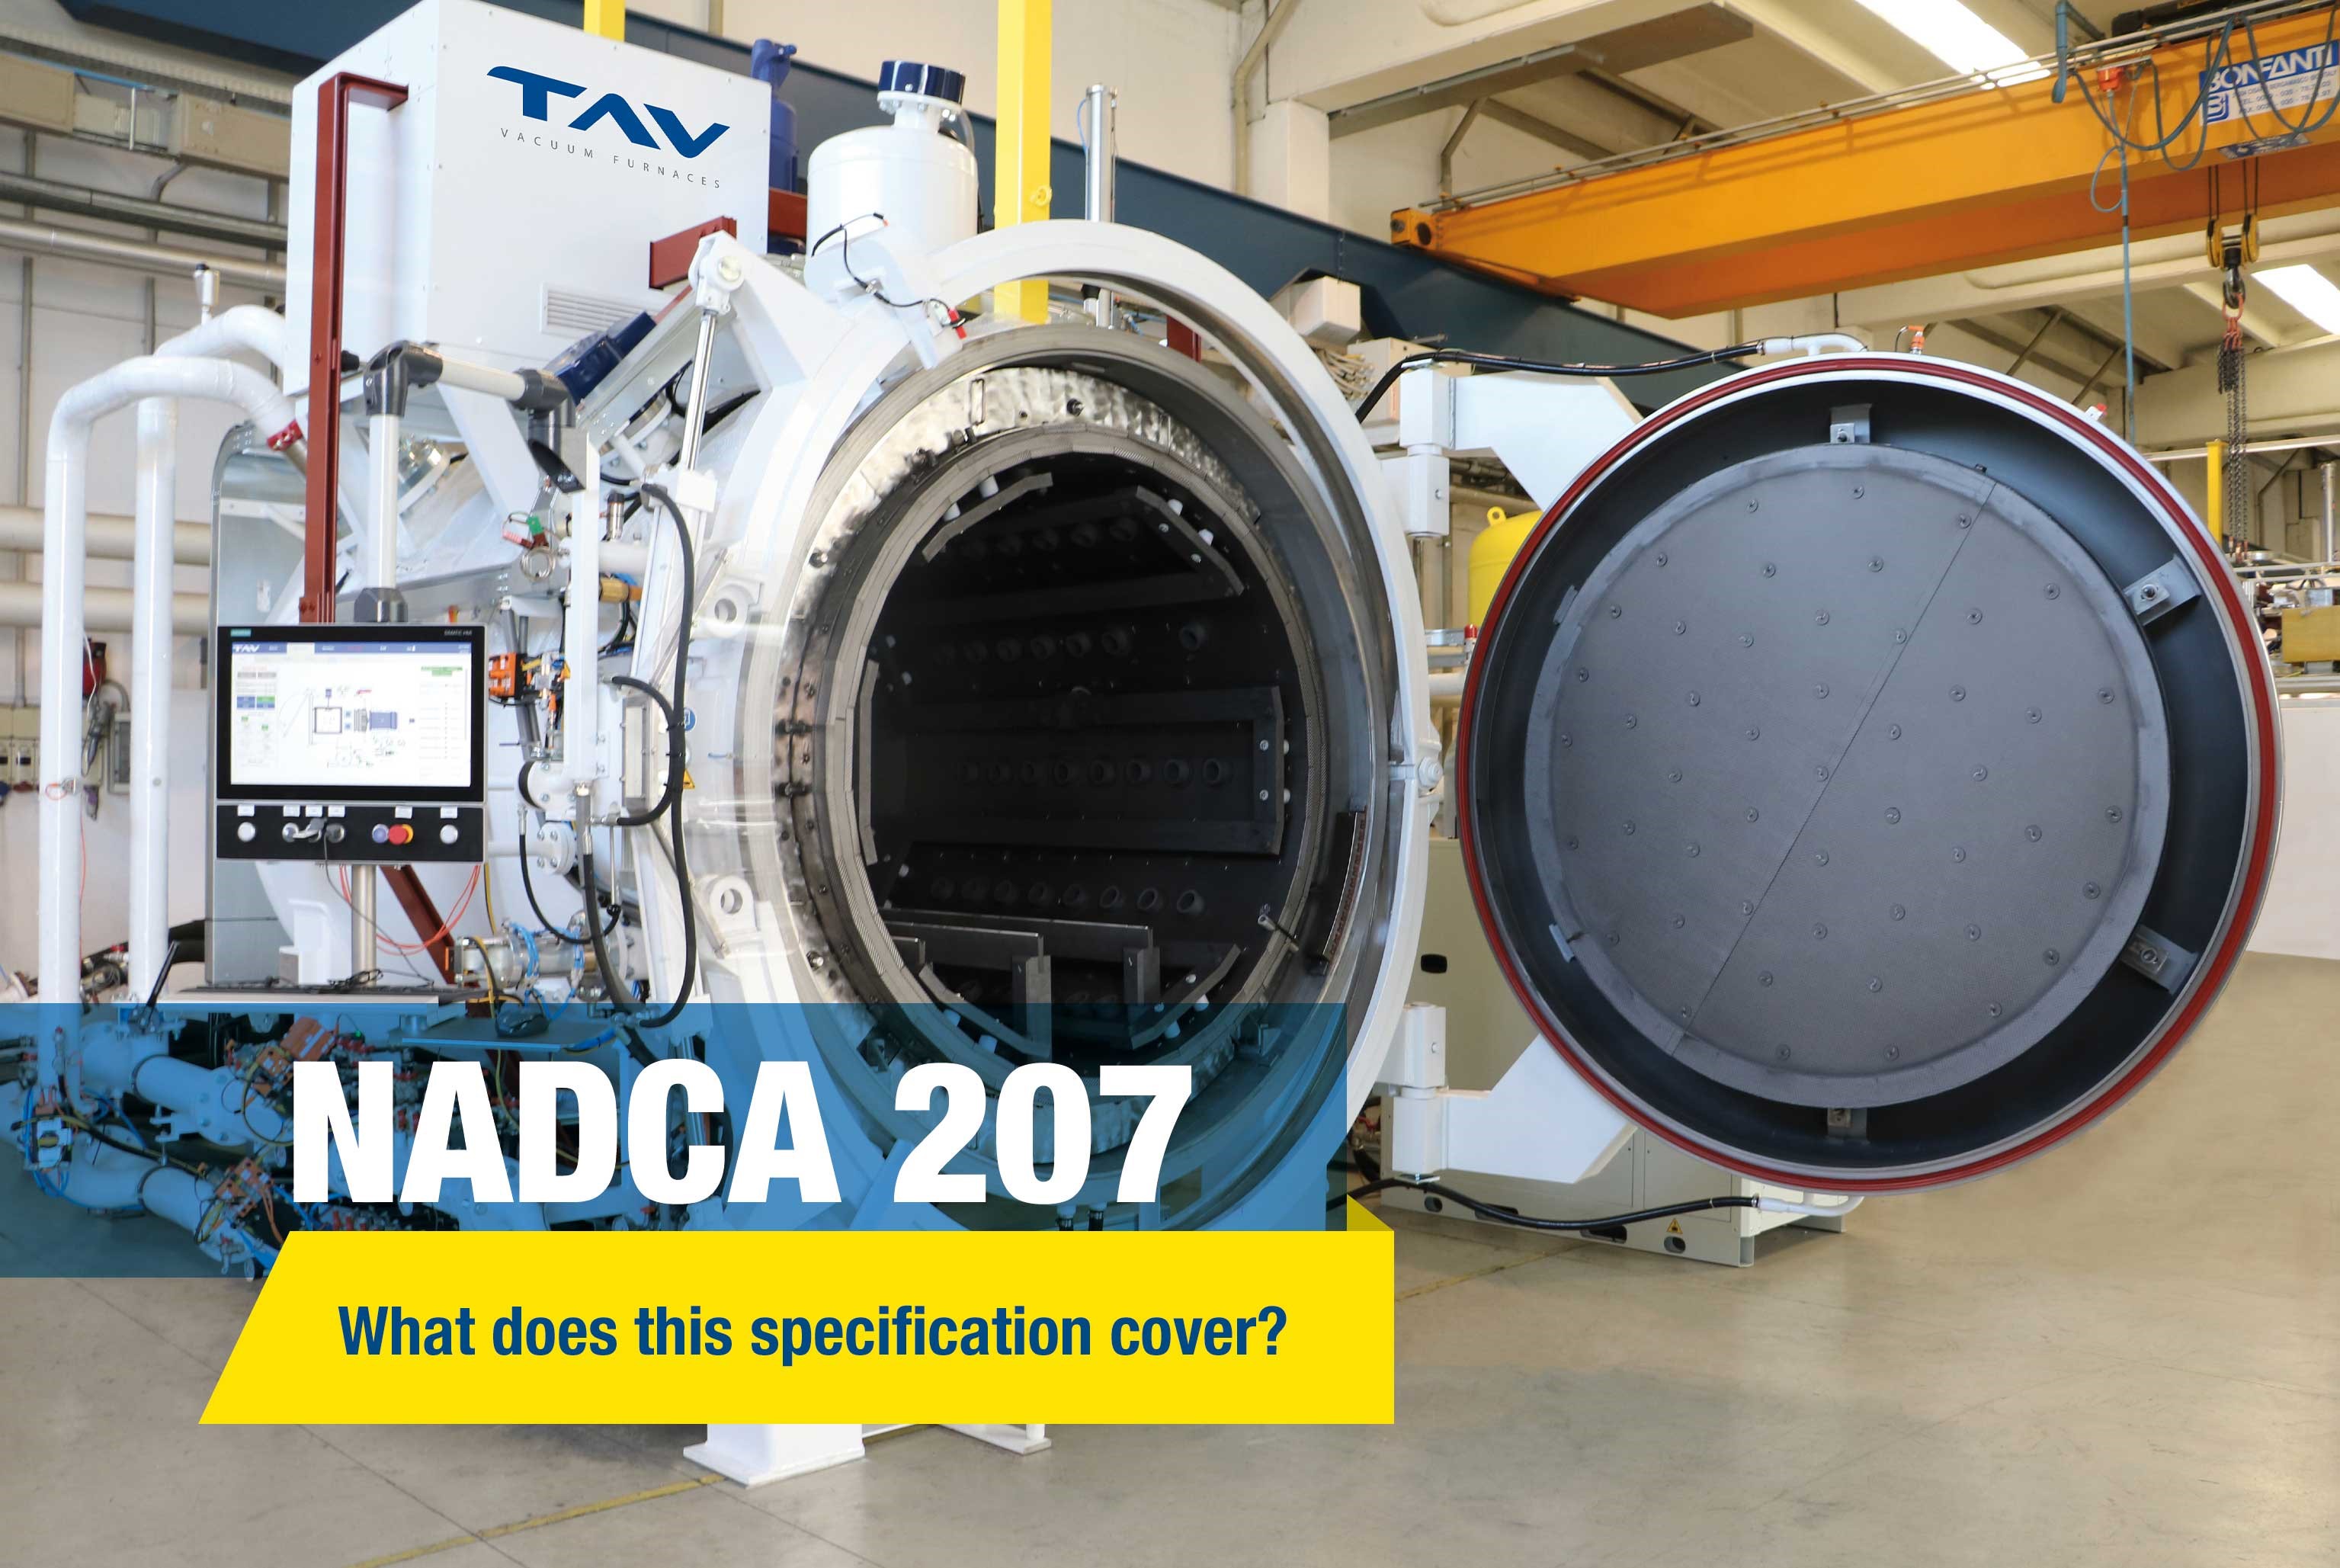 Do you know what Nadca 207 is?